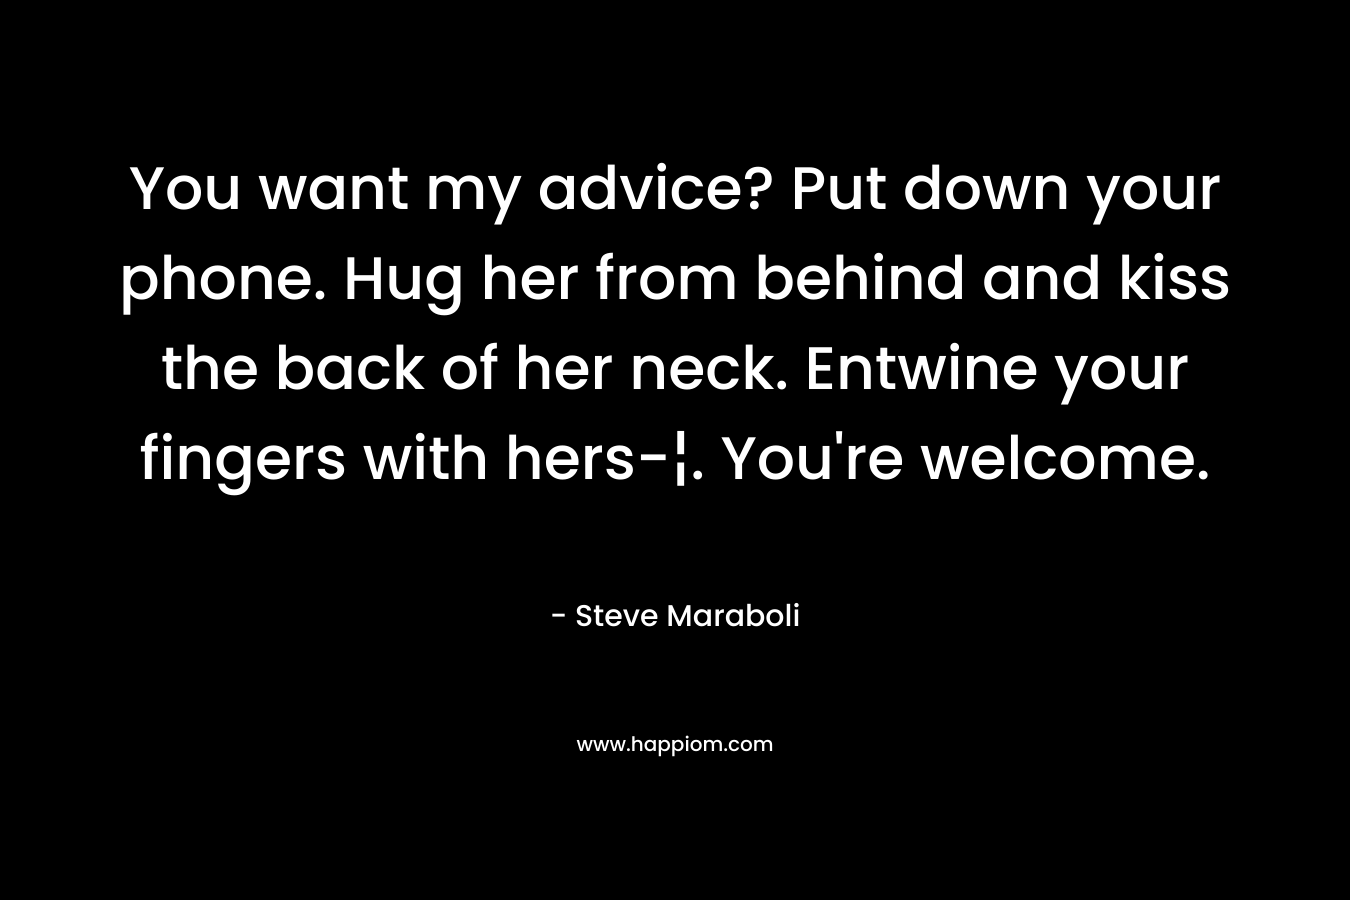 You want my advice? Put down your phone. Hug her from behind and kiss the back of her neck. Entwine your fingers with hers-¦. You’re welcome. – Steve Maraboli